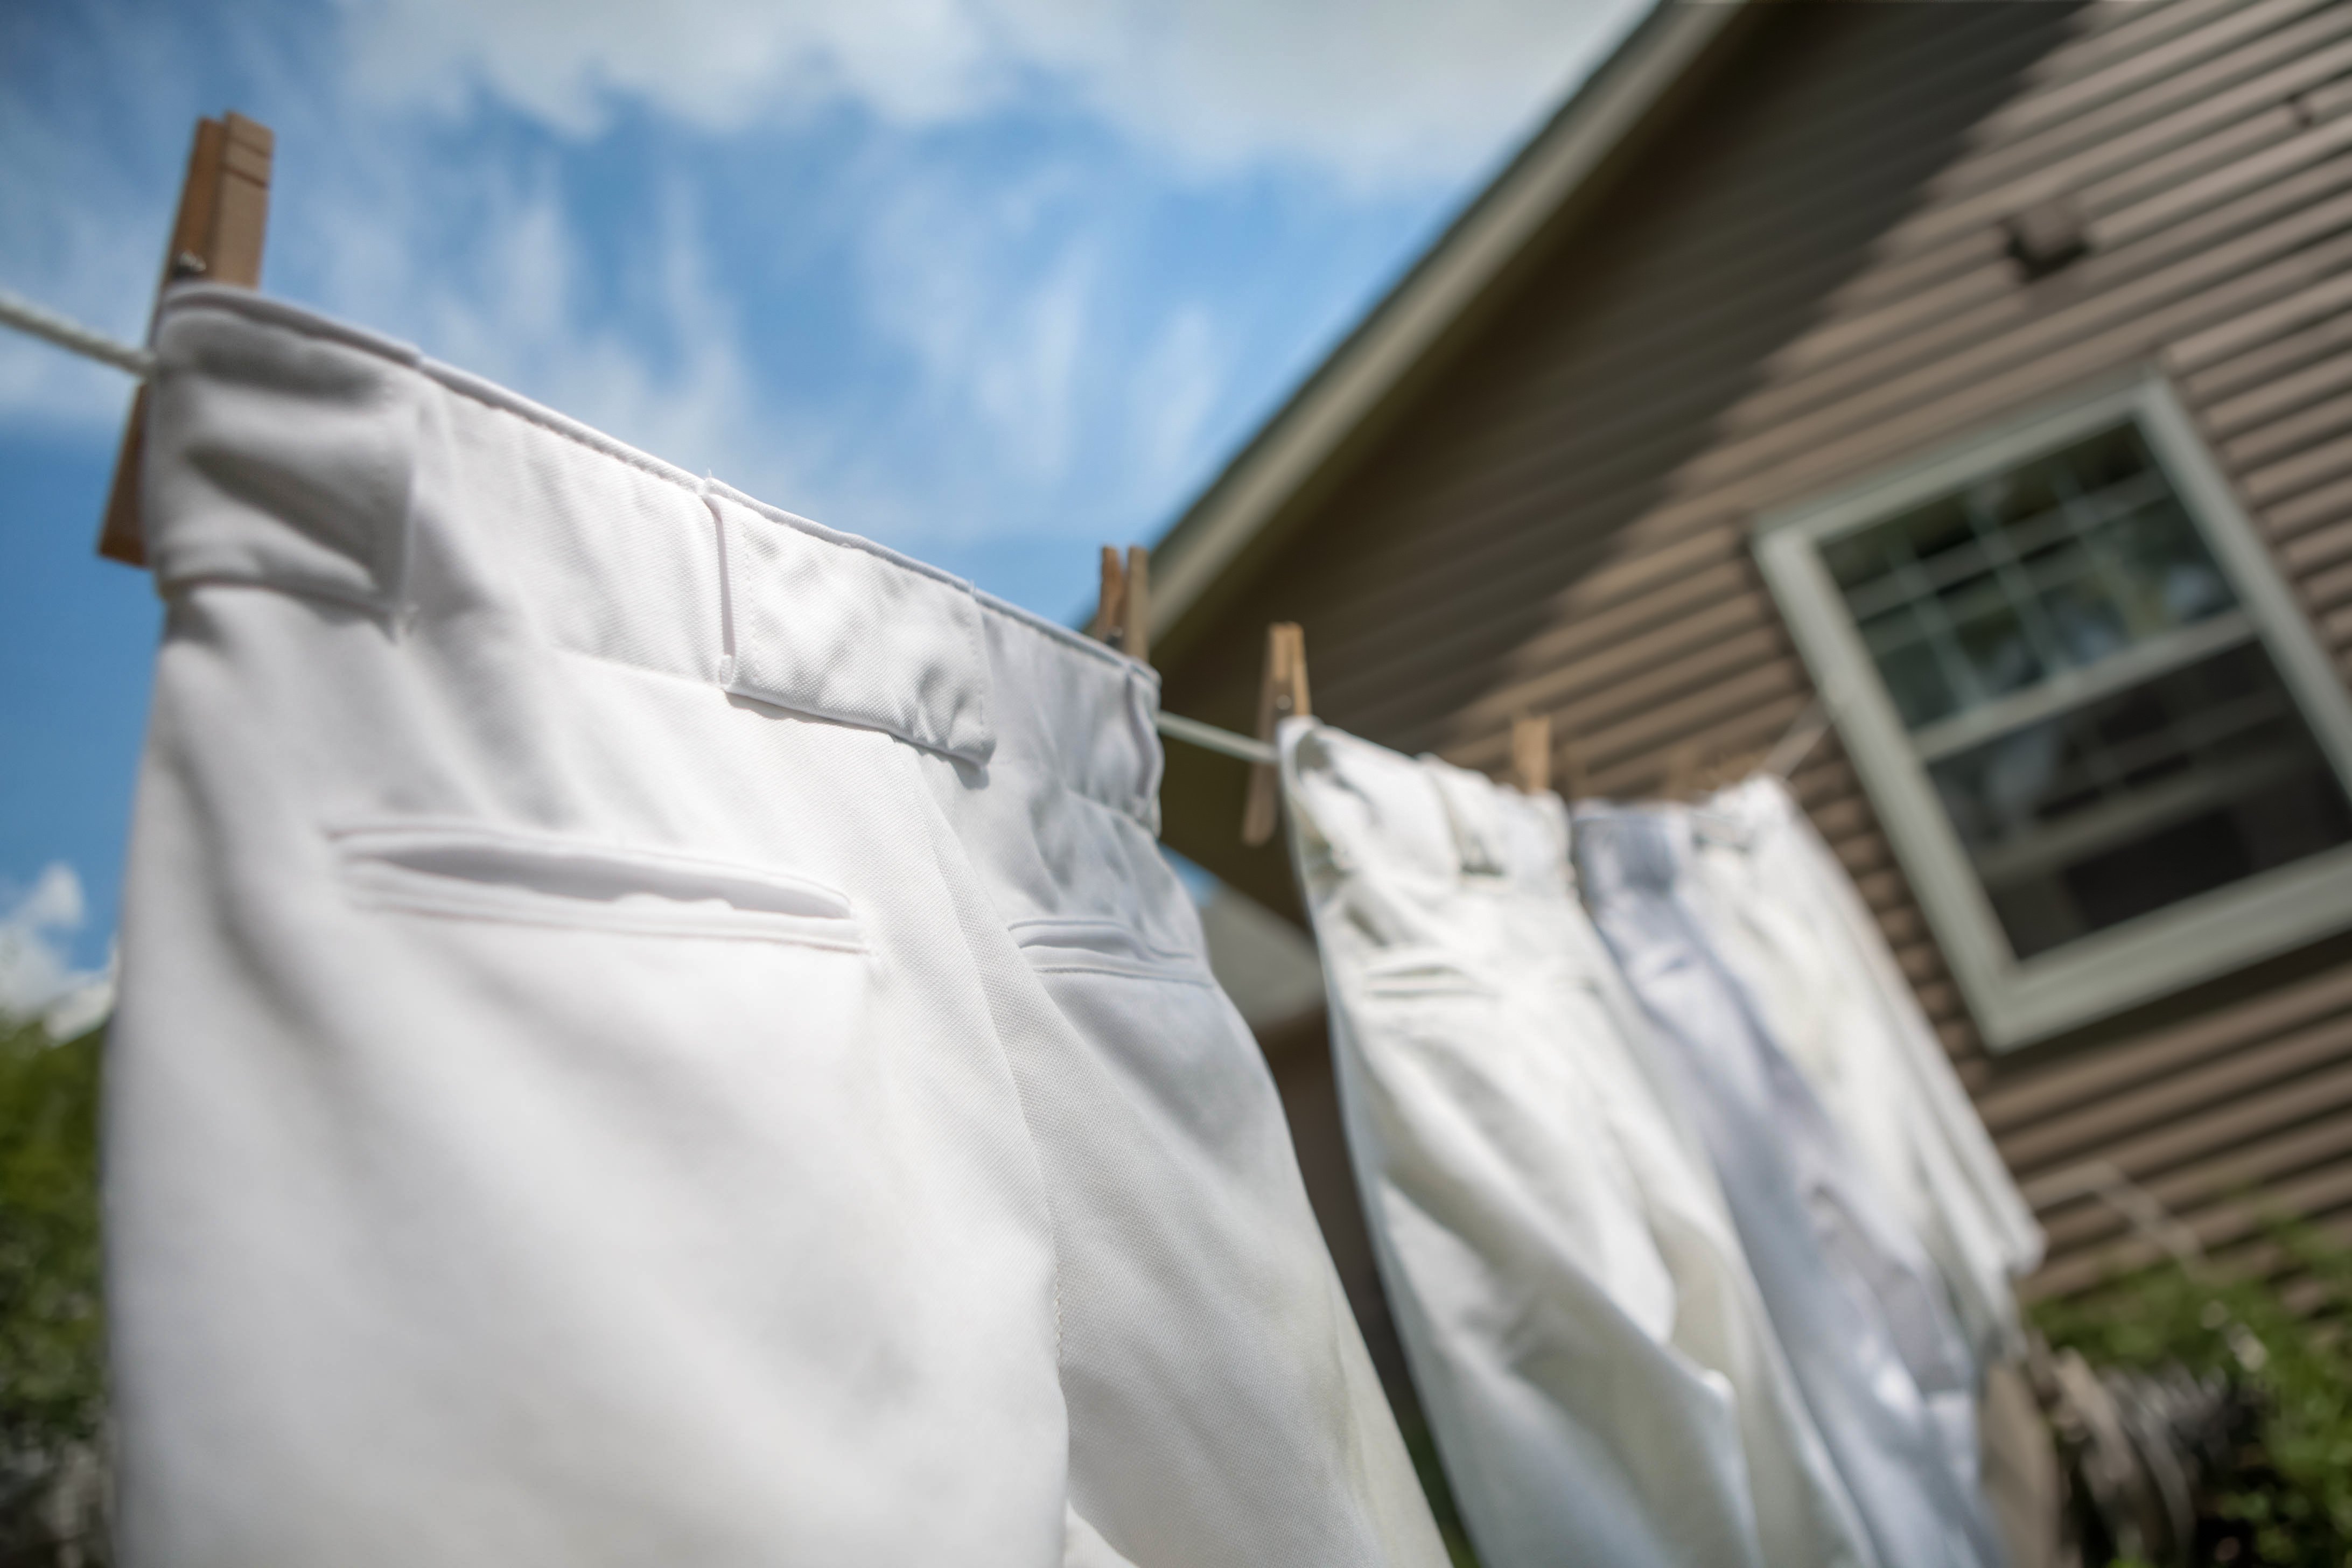 How To Clean White Baseball Pants In 4 Easy Steps!